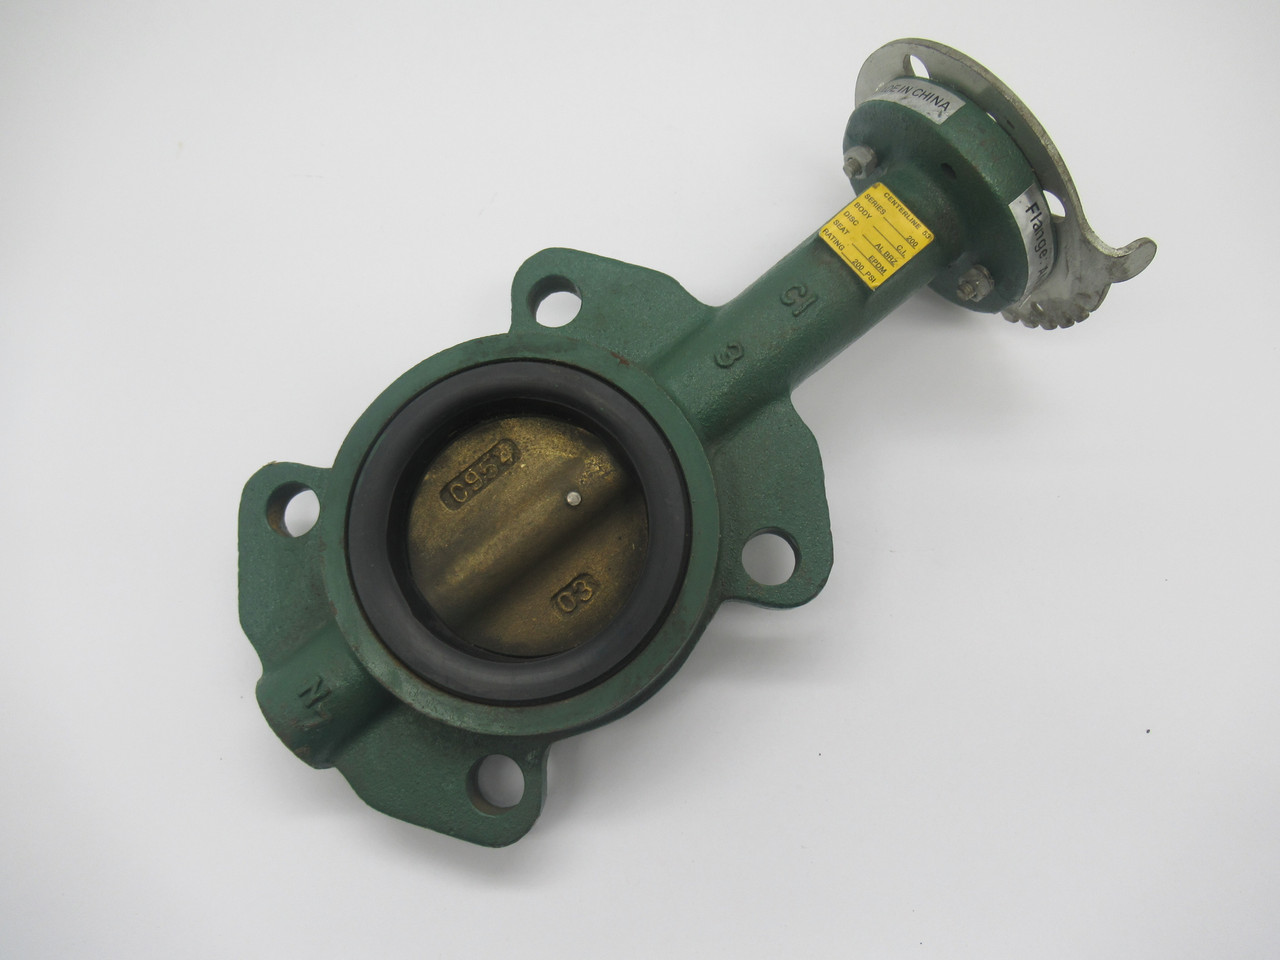 Centerline Series 200 Butterfly Valve 3" 200Psi *No Lever* USED